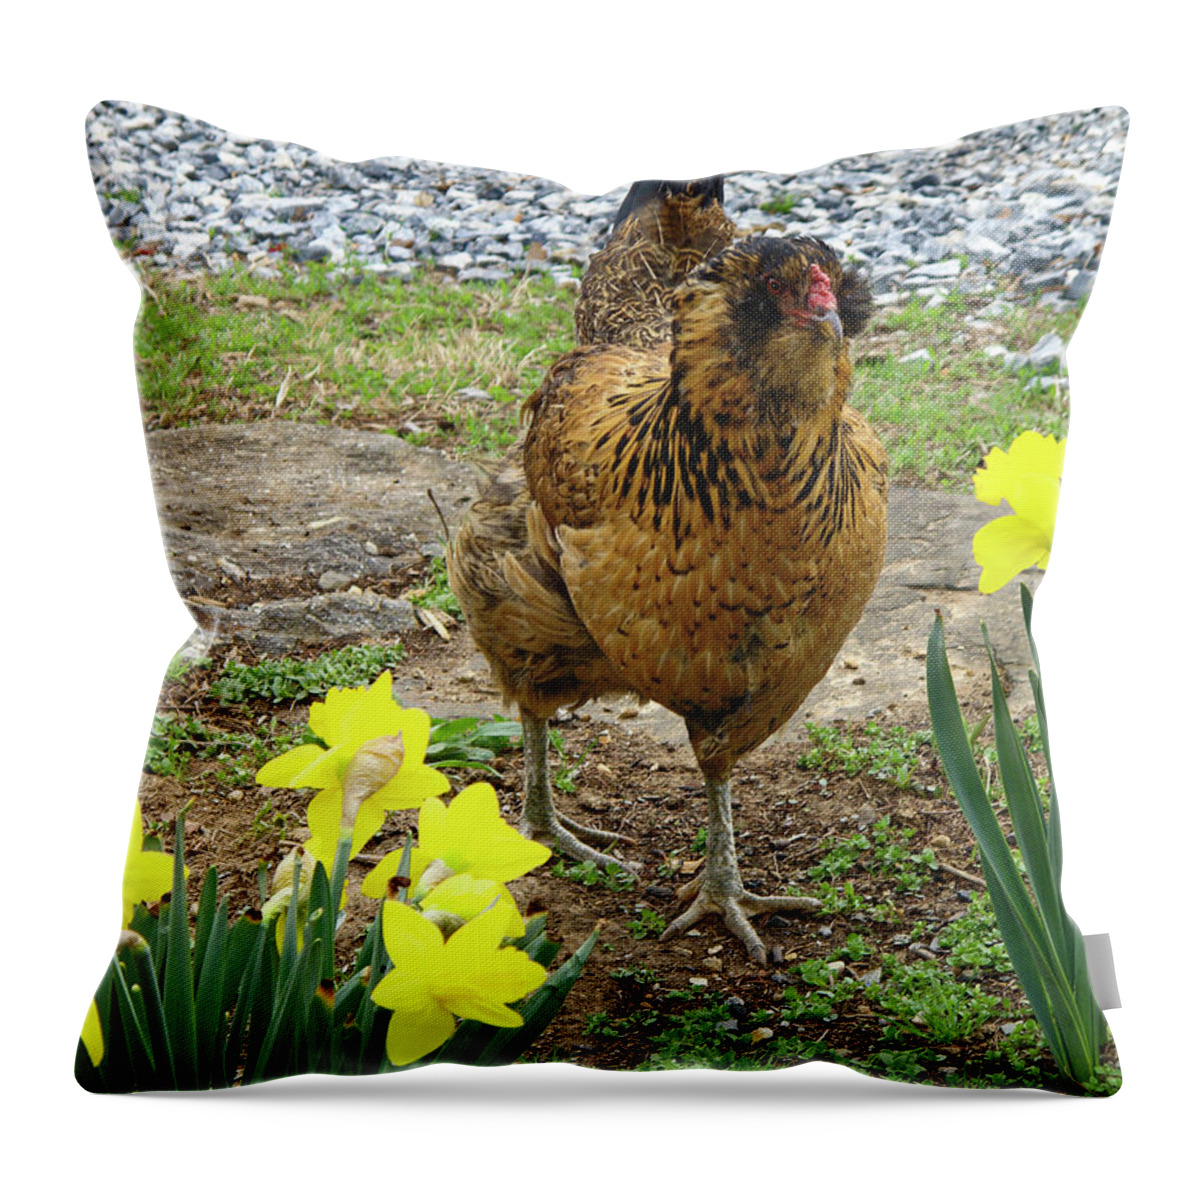 Chicken Walking Among Yellow Daffodils Throw Pillow featuring the photograph Chicken Among Daffodils by Sally Weigand